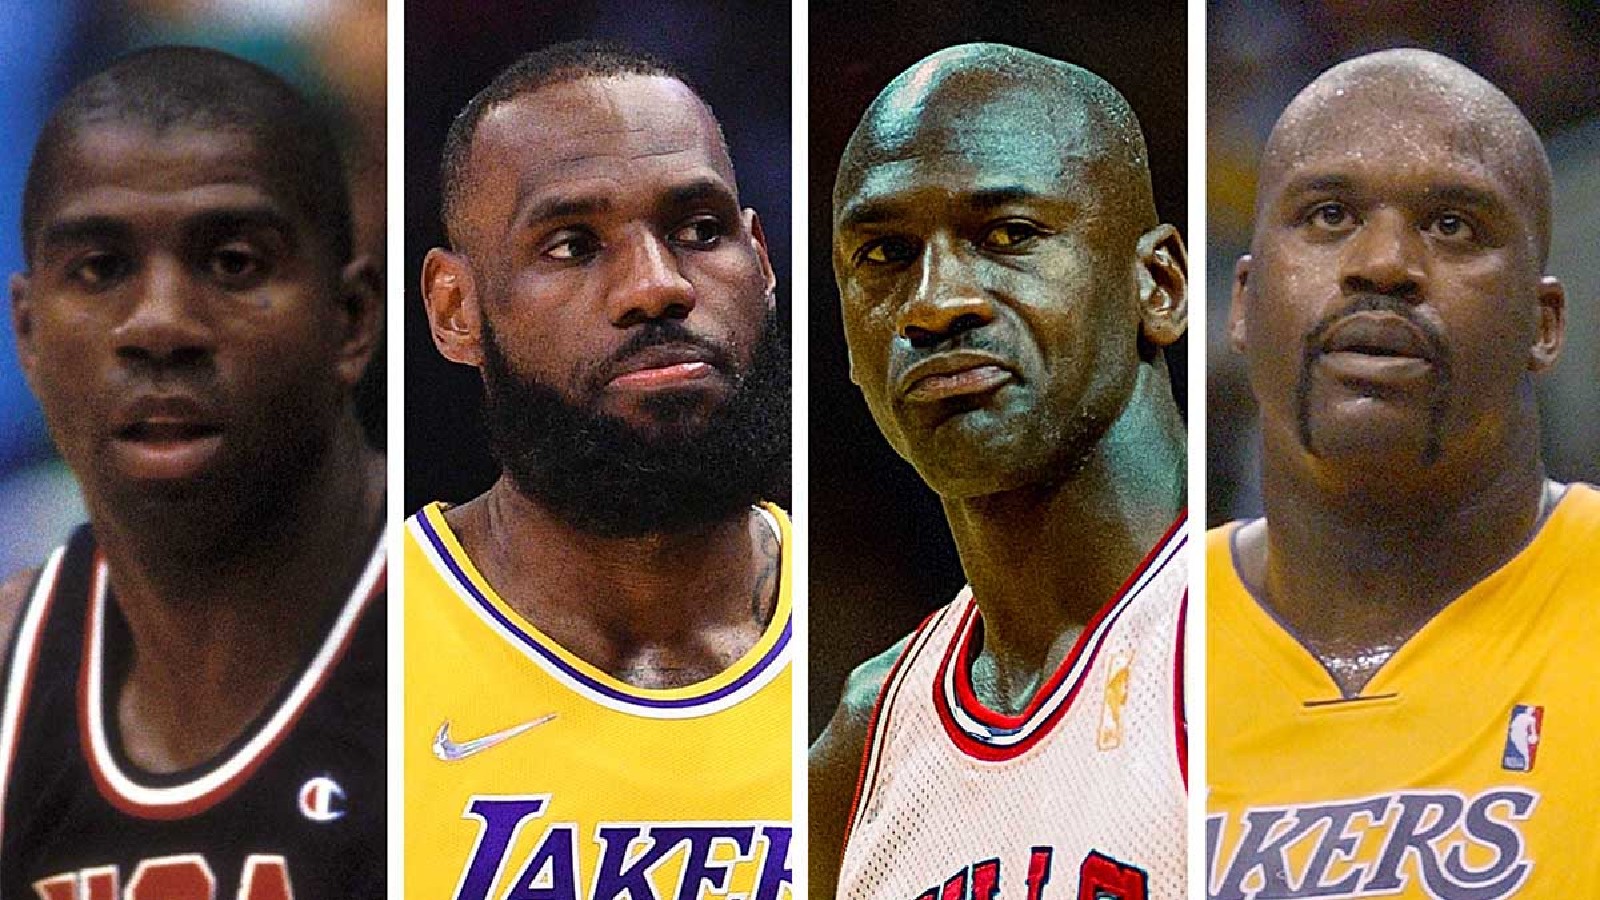 Top 10 Richest NBA Players of All Time - Which Top 10